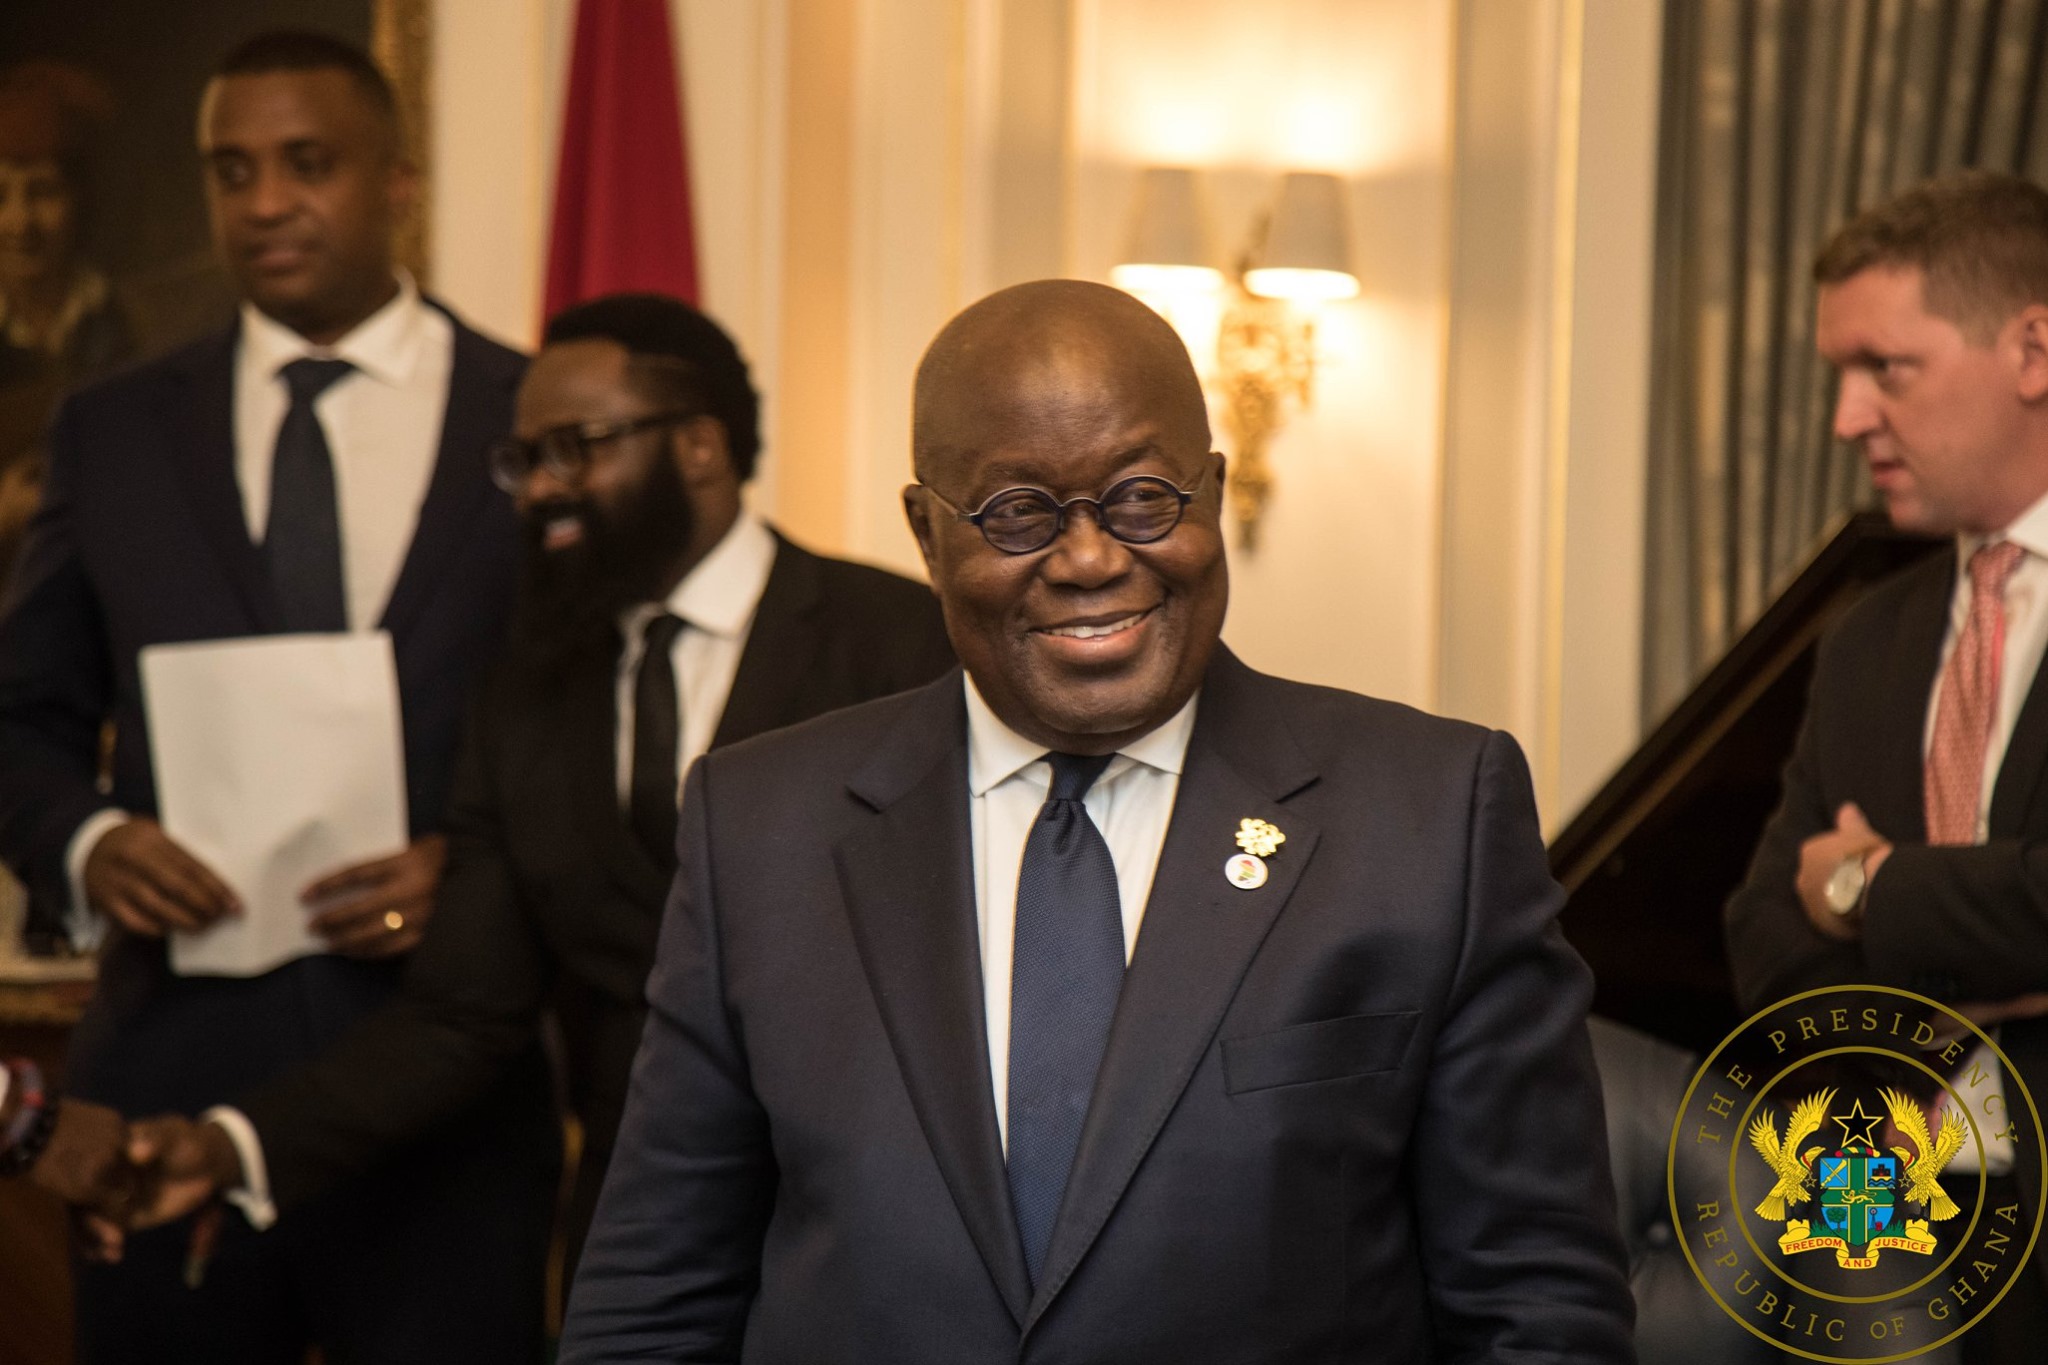 All my flagship programs are working - Akufo-Addo boasts to church members